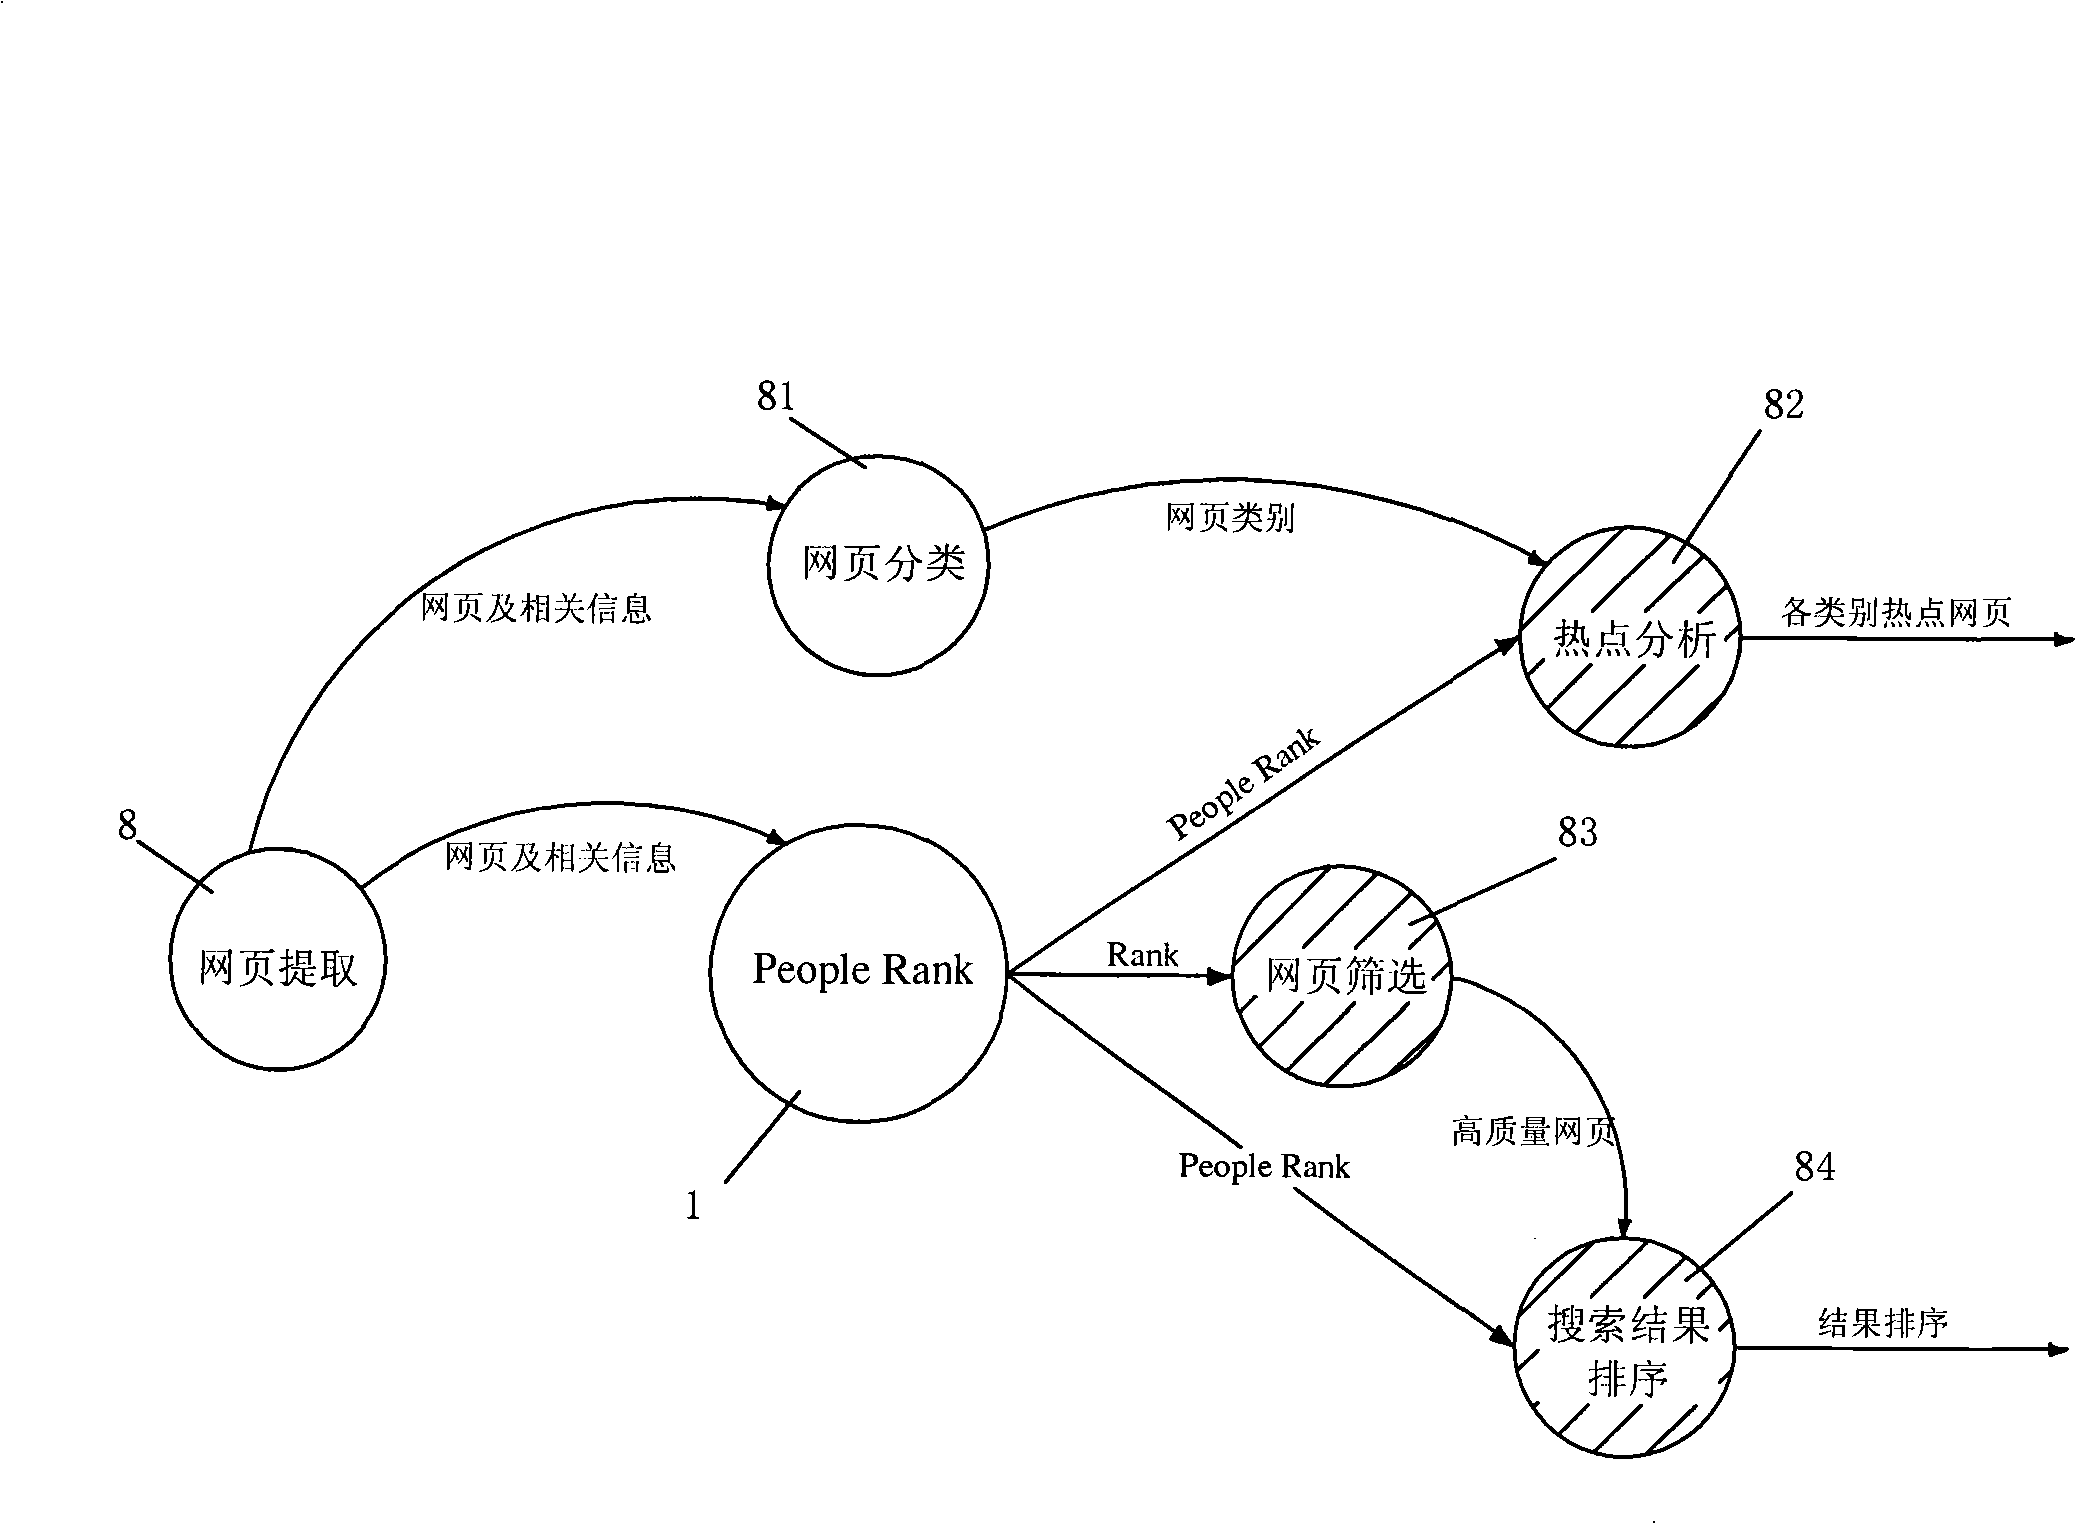 Method for evaluating network resource value and application of searching engine field